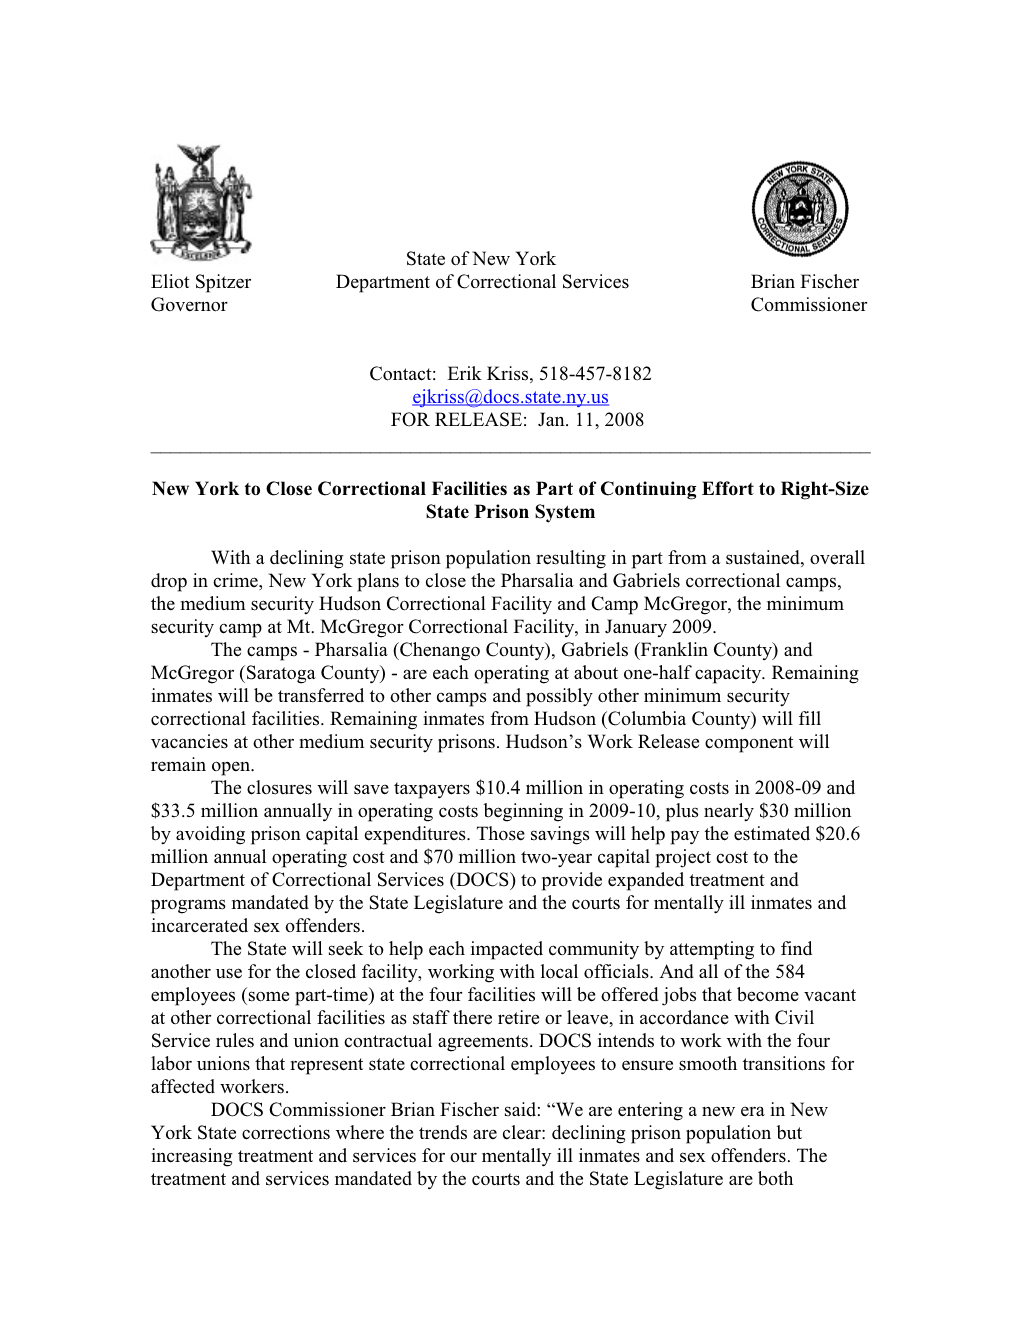 New York to Close Correctional Facilities As Part of Continuing Effort to Right-Sizestate